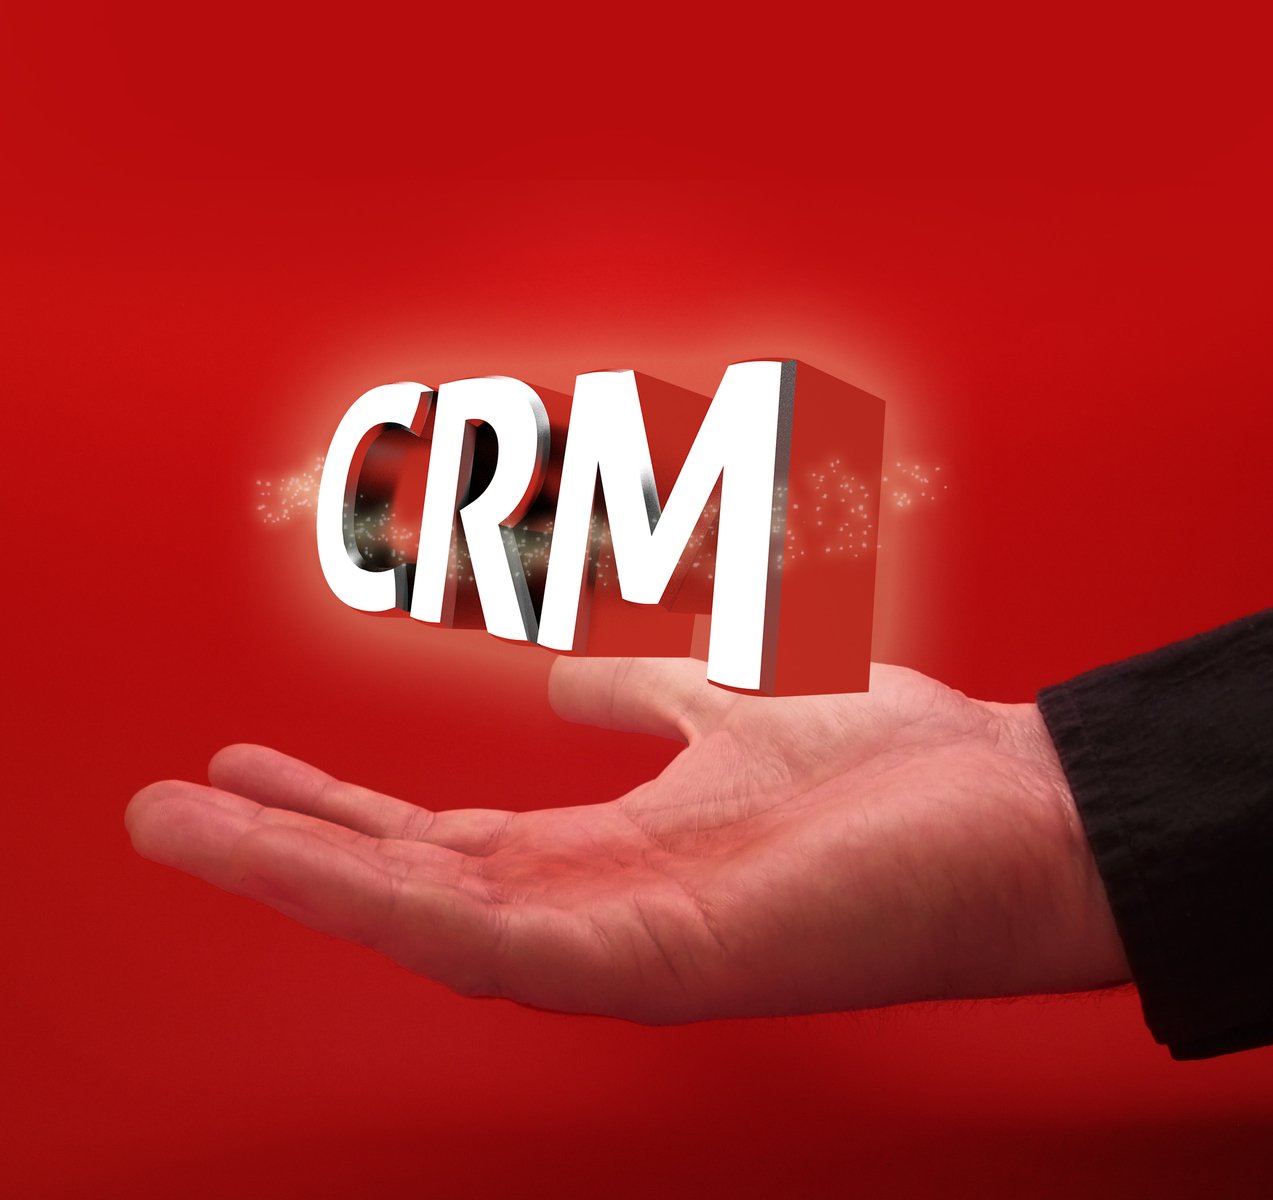 a person's hand reaching out towards the word crm